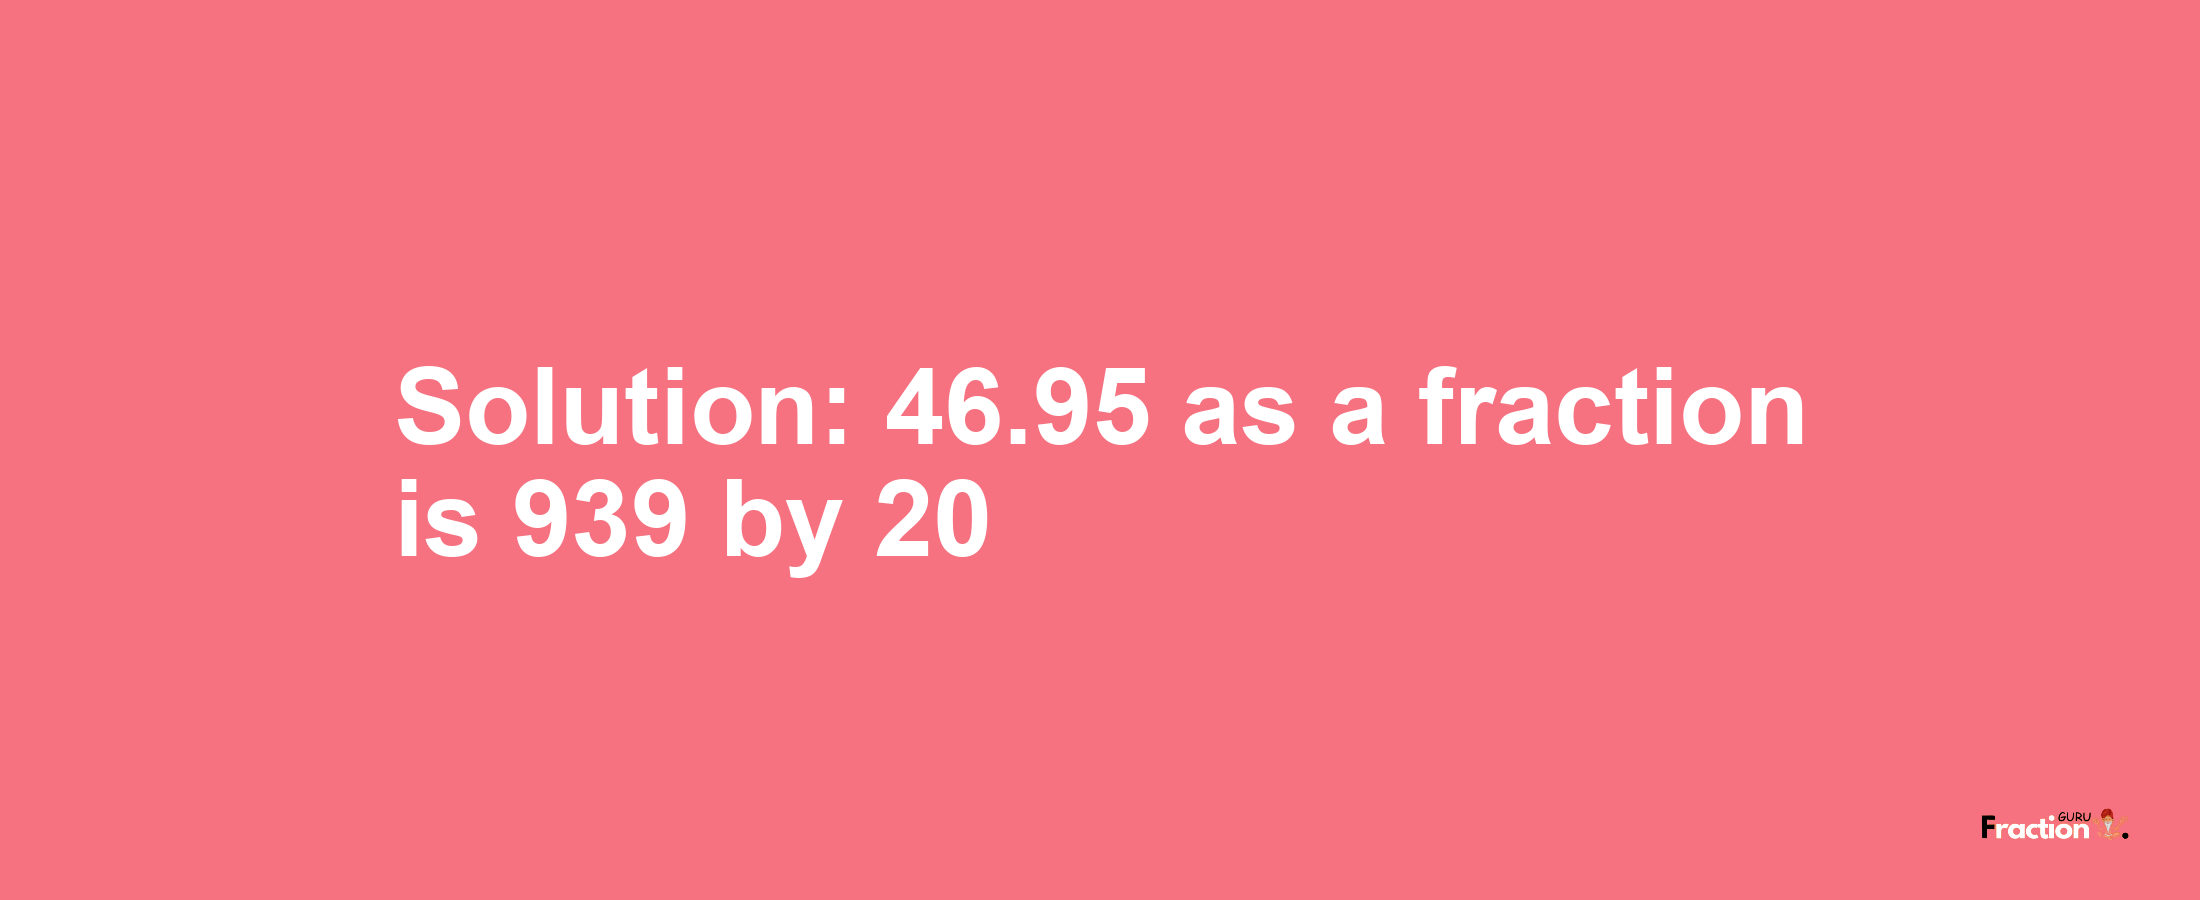 Solution:46.95 as a fraction is 939/20